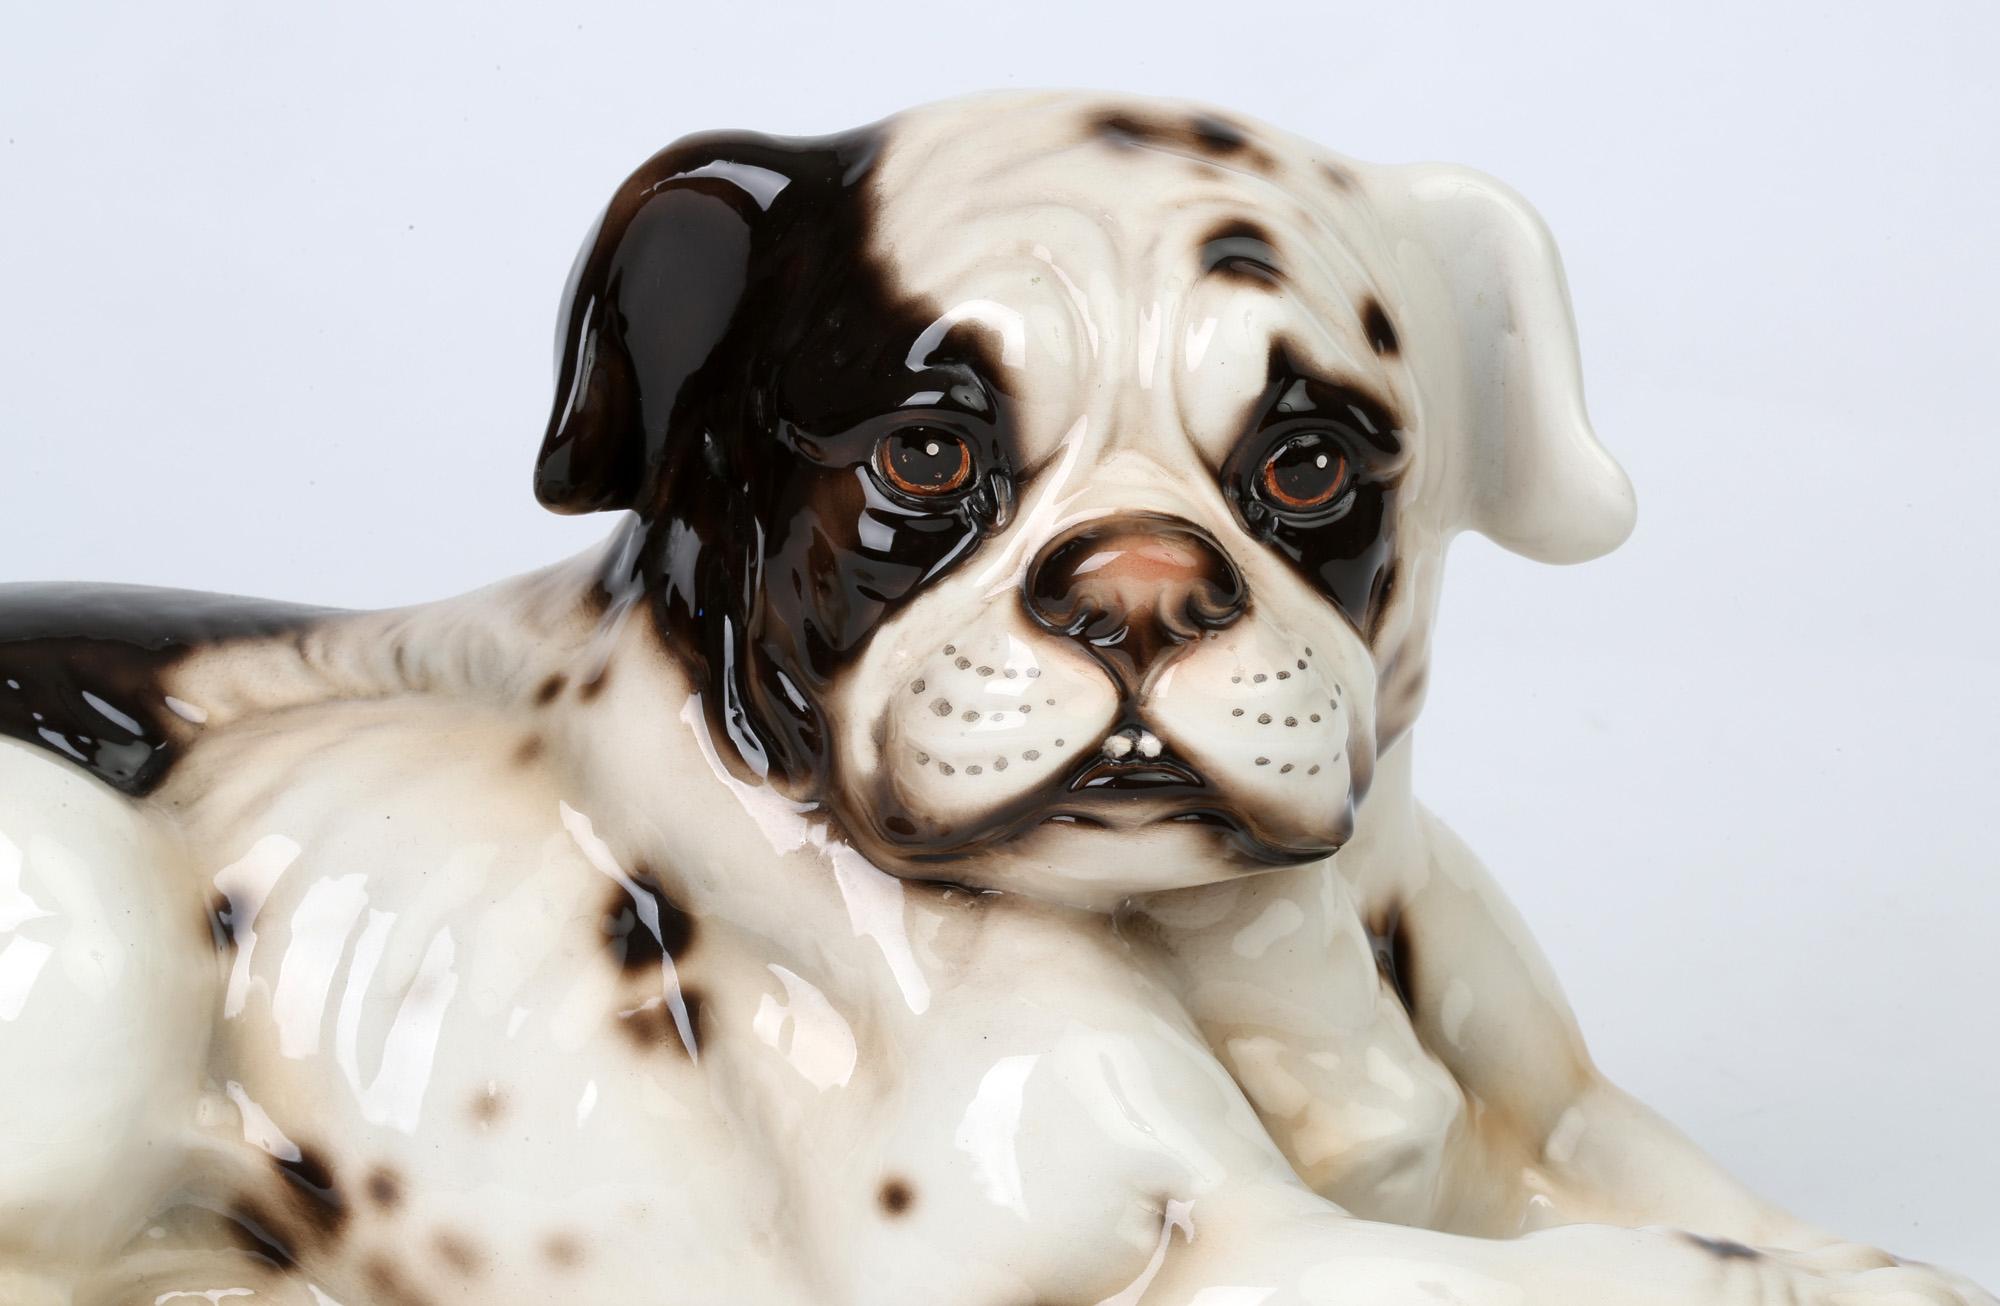 A fine midcentury vintage Italian ceramic figure of a resting puppy dog by Giovanni Ronzan. This figure is well modeled with molded and painted features. The dog has painted maker’s marks to the base along with number 1600/a. Giovanni Ronzan was